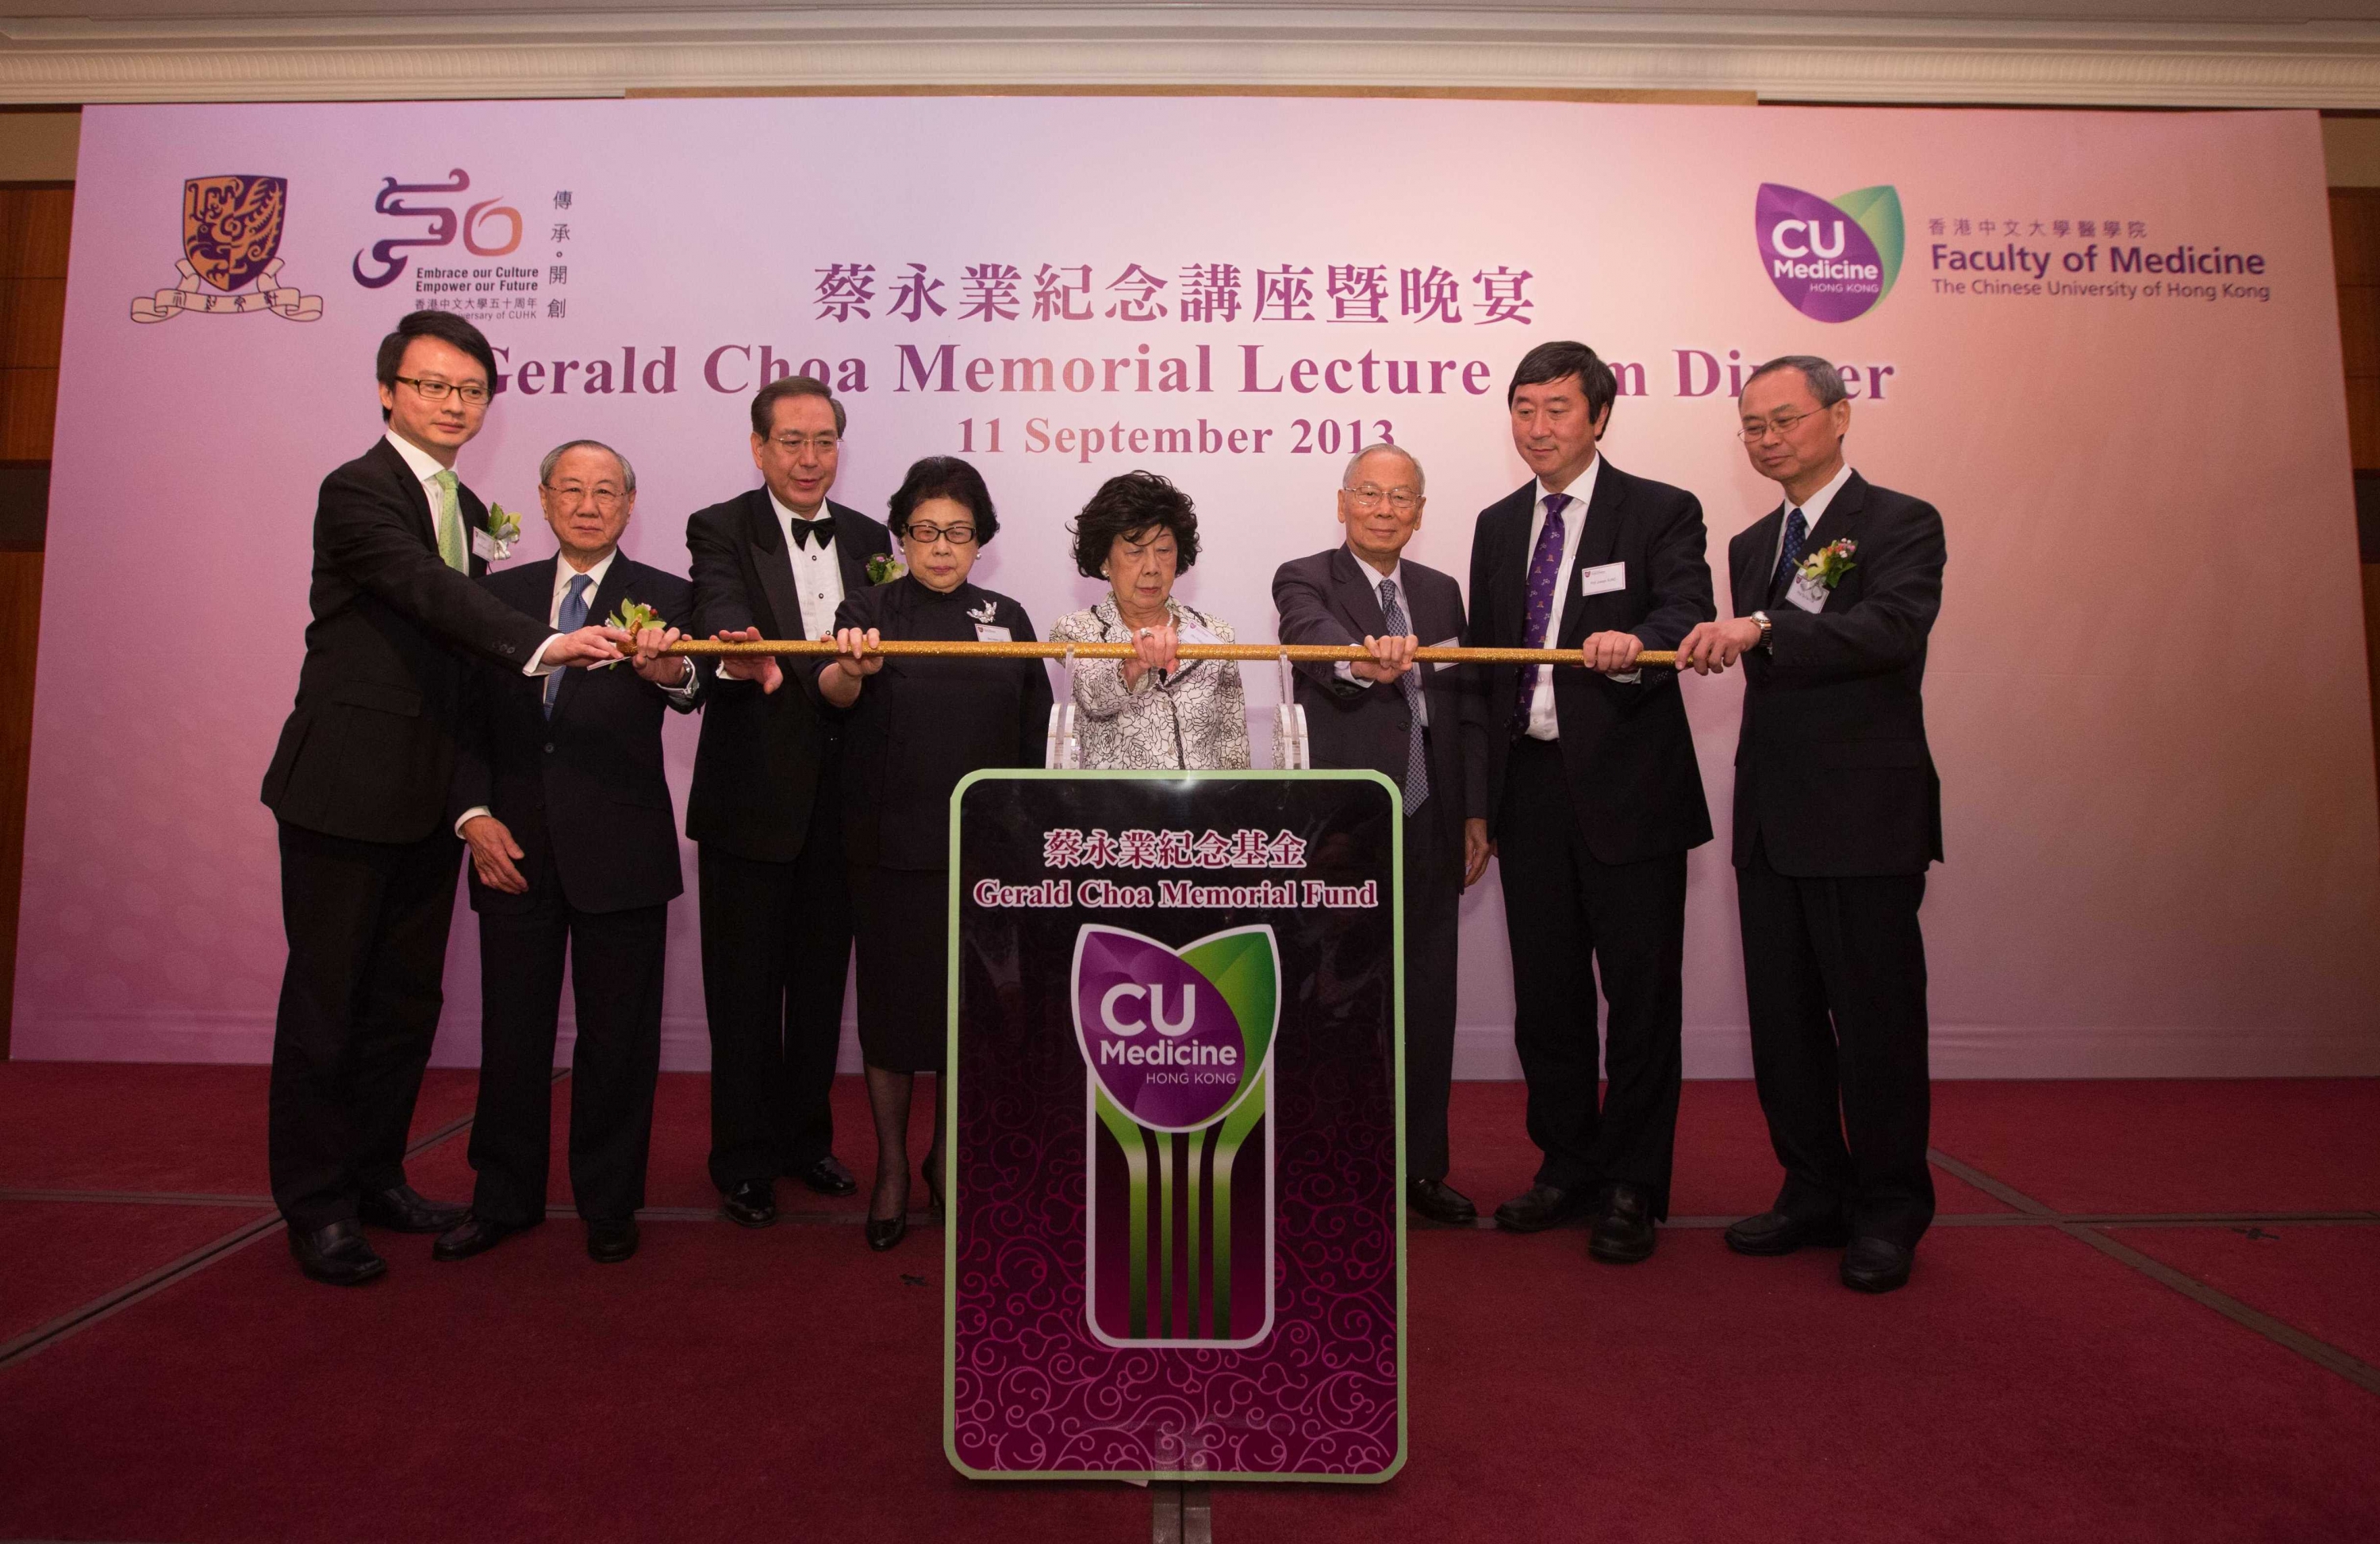 (From left) Prof. Francis K.L. CHAN, Dean of Medicine, CUHK; Prof. Richard YU; Prof. the Honourable Arthur K.C. LI, Member of the Executive Council of HKSAR and Emeritus Professor of Surgery of CUHK; Mrs Helen LEE; Mrs. Peggy CHOA; Prof. Sir David TODD; Prof. Joseph J.Y. SUNG, Vice-Chancellor and President, CUHK and Prof. T.F. FOK, Pro-Vice-Chancellor, CUHK officiated the inauguration ceremony of the Gerald Choa Memorial Fund.